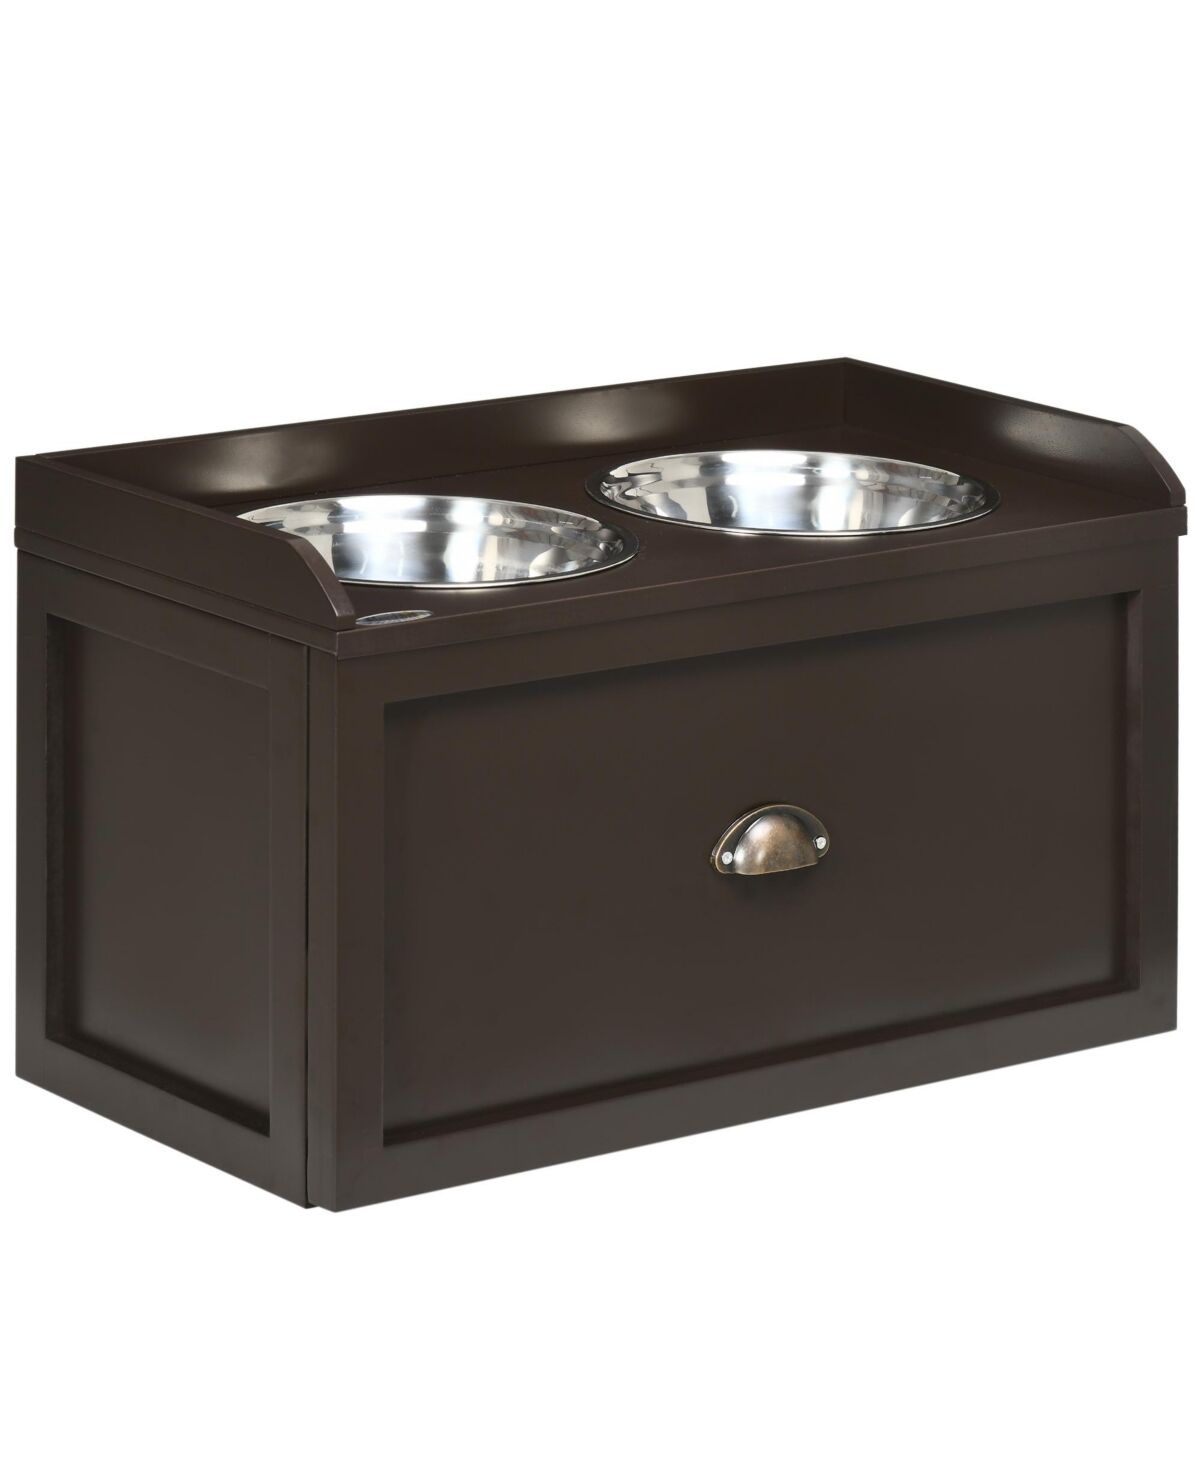 PawHut Large Elevated Dog Bowls with Storage, Raised Dog Bowl Stand, Brown - Brown